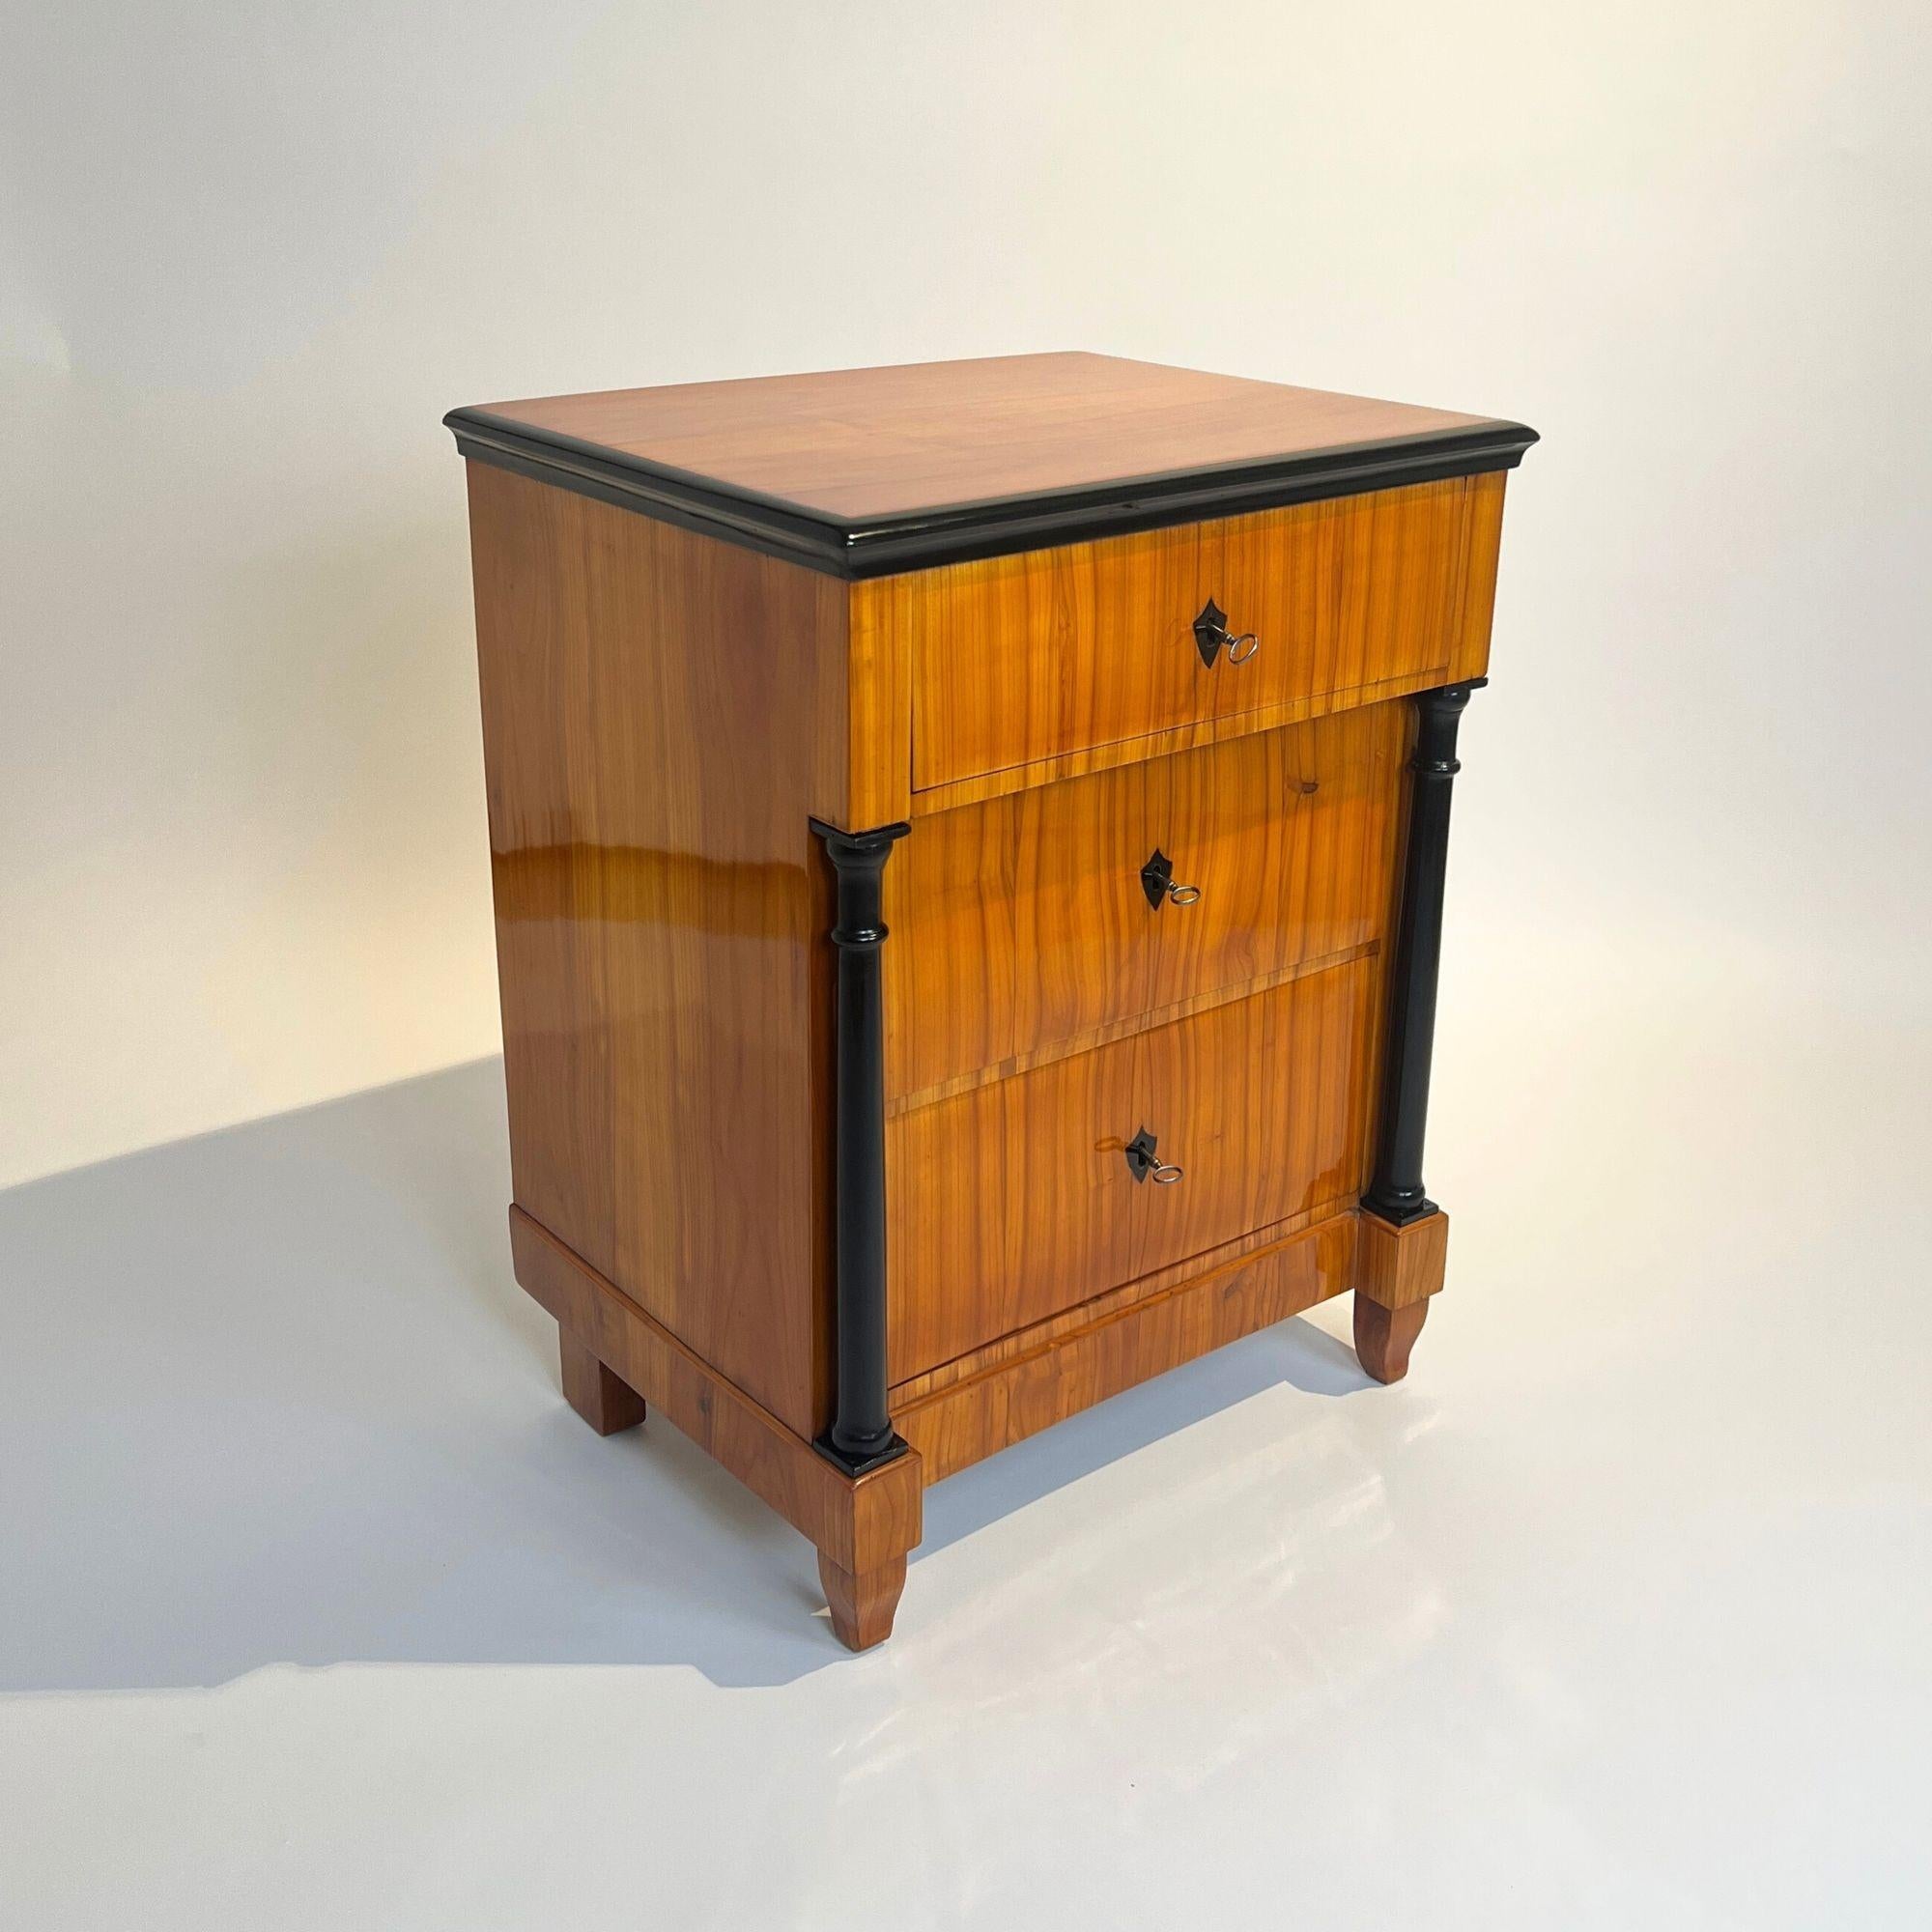 Polished Small Biedermeier Chest of Drawers, Cherry wood, South Germany circa 1830. For Sale